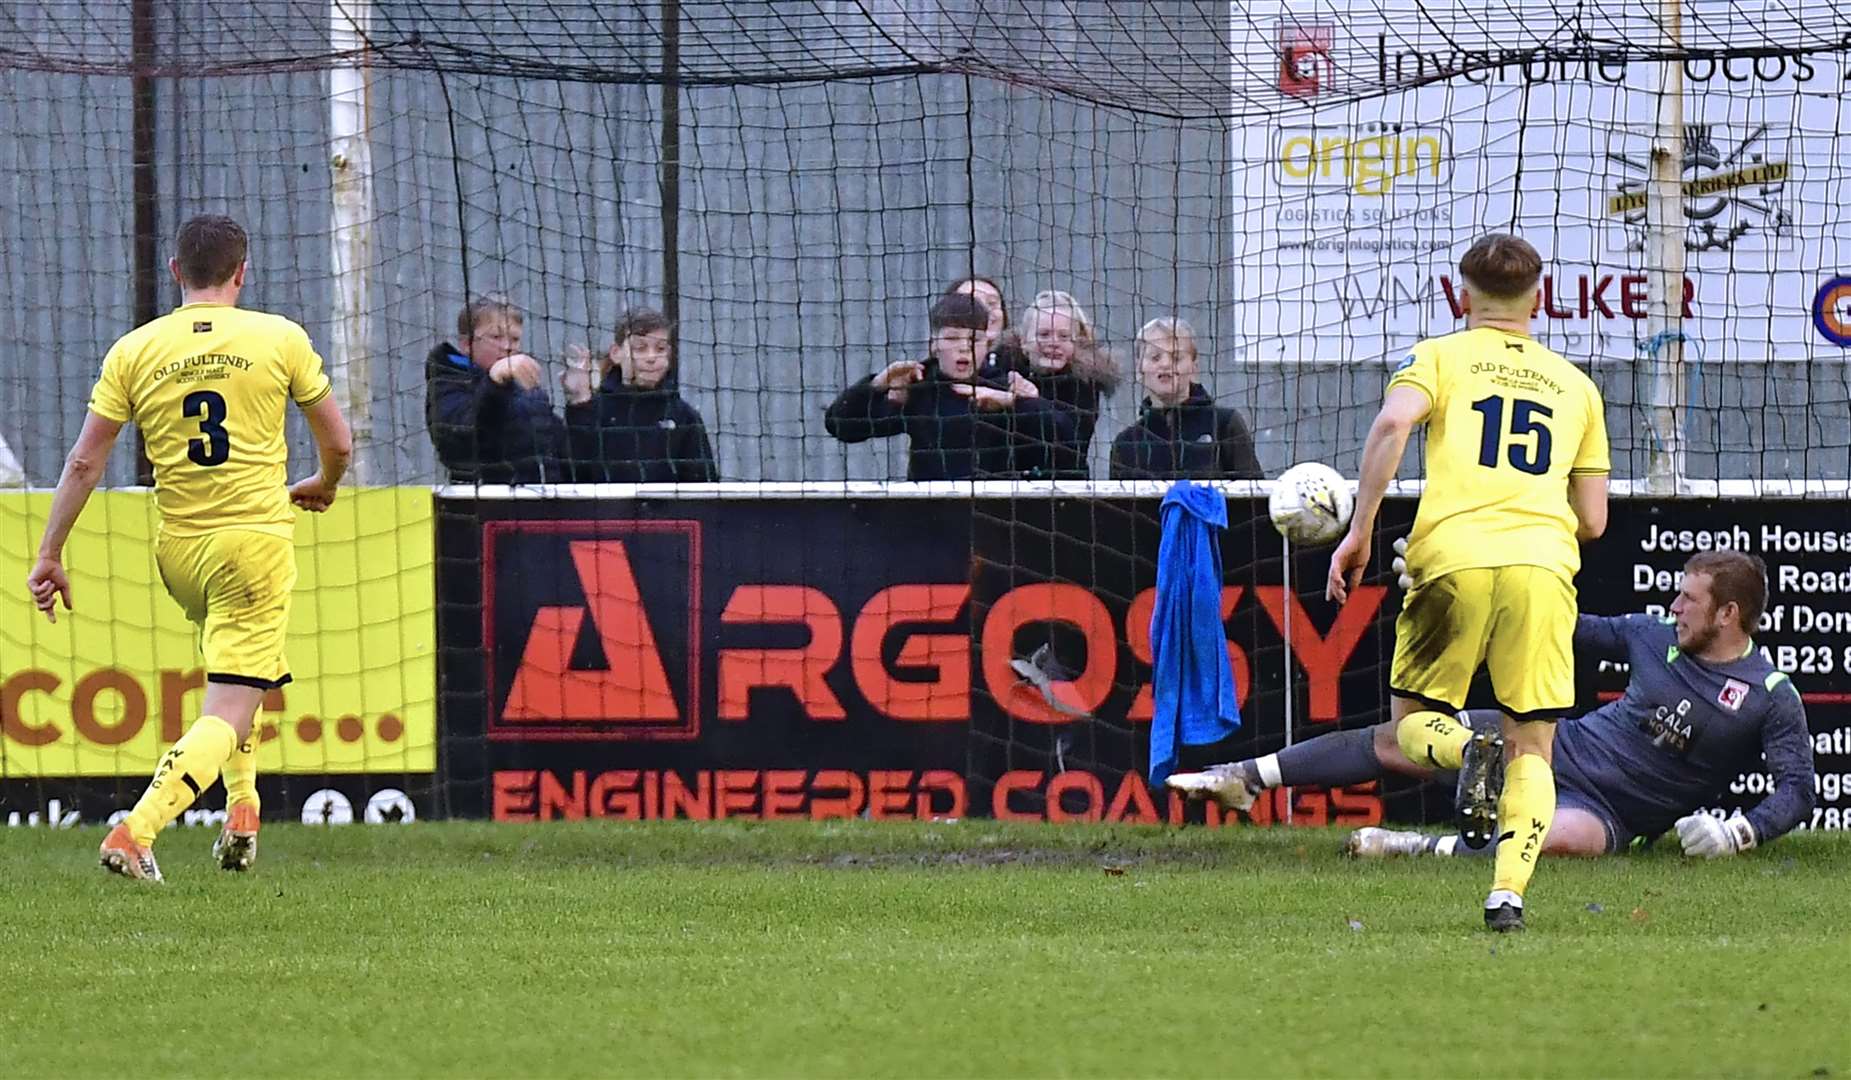 Gary Manson (left) scored the winner from the penalty spot in the last league meeting between Academy and Locos, in November 2019 at Harlaw Park. Picture: Mel Roger